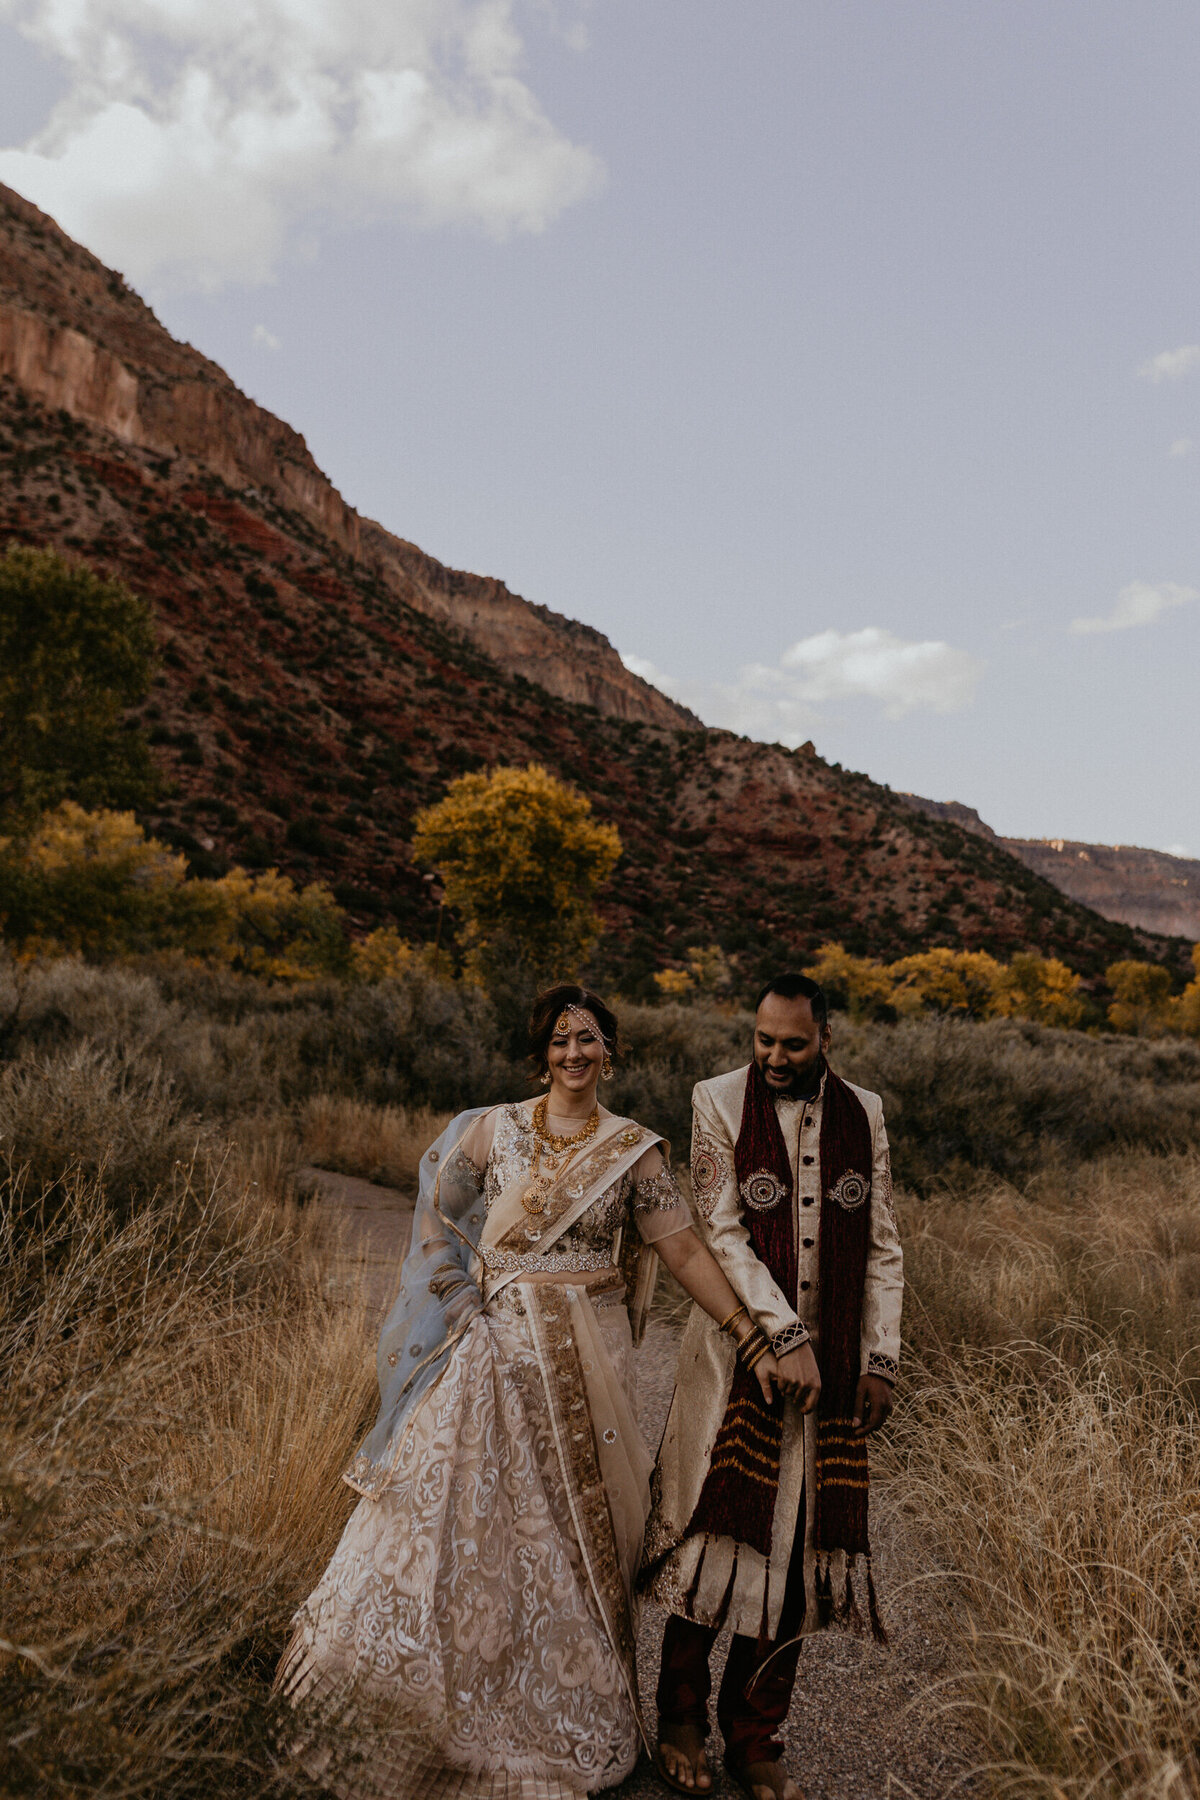 Indian newlyweds walking along the red rocks in Jemez Springs, New Mexico